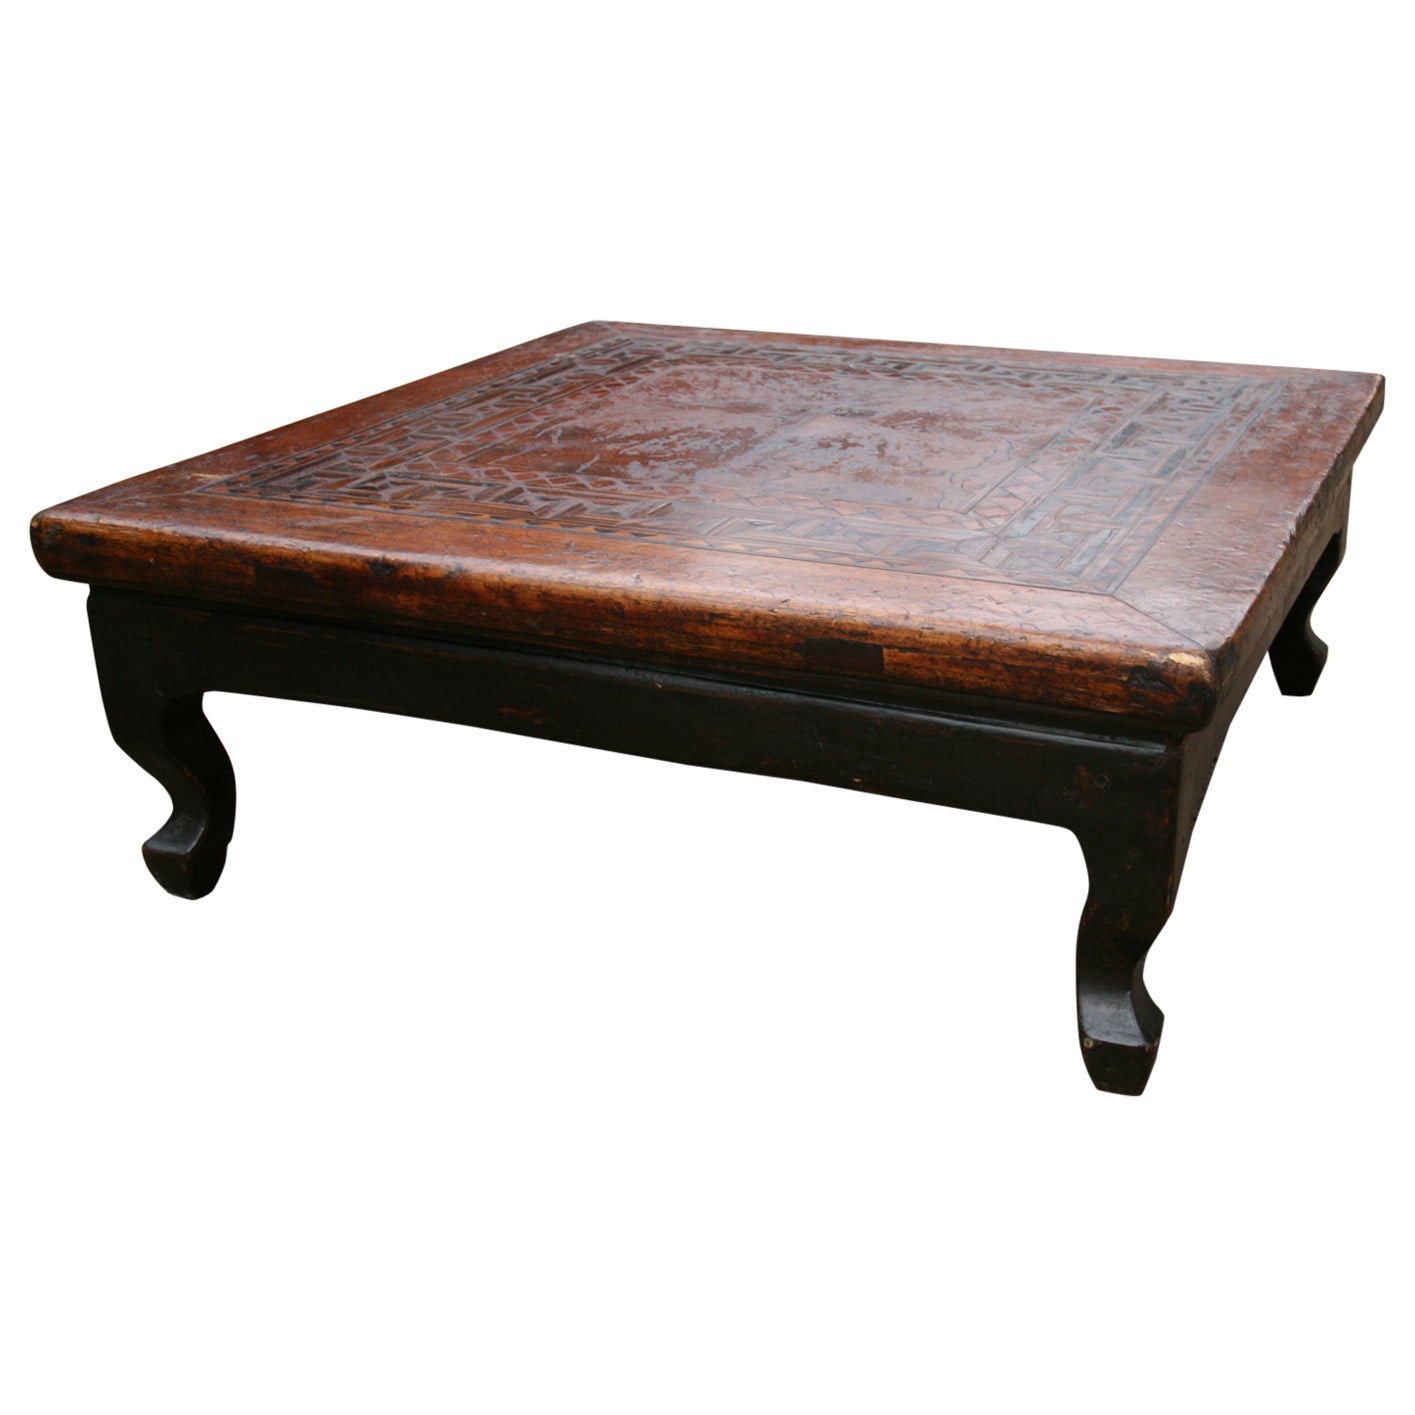 Chinese Inlaid Wood Low Coffee Table